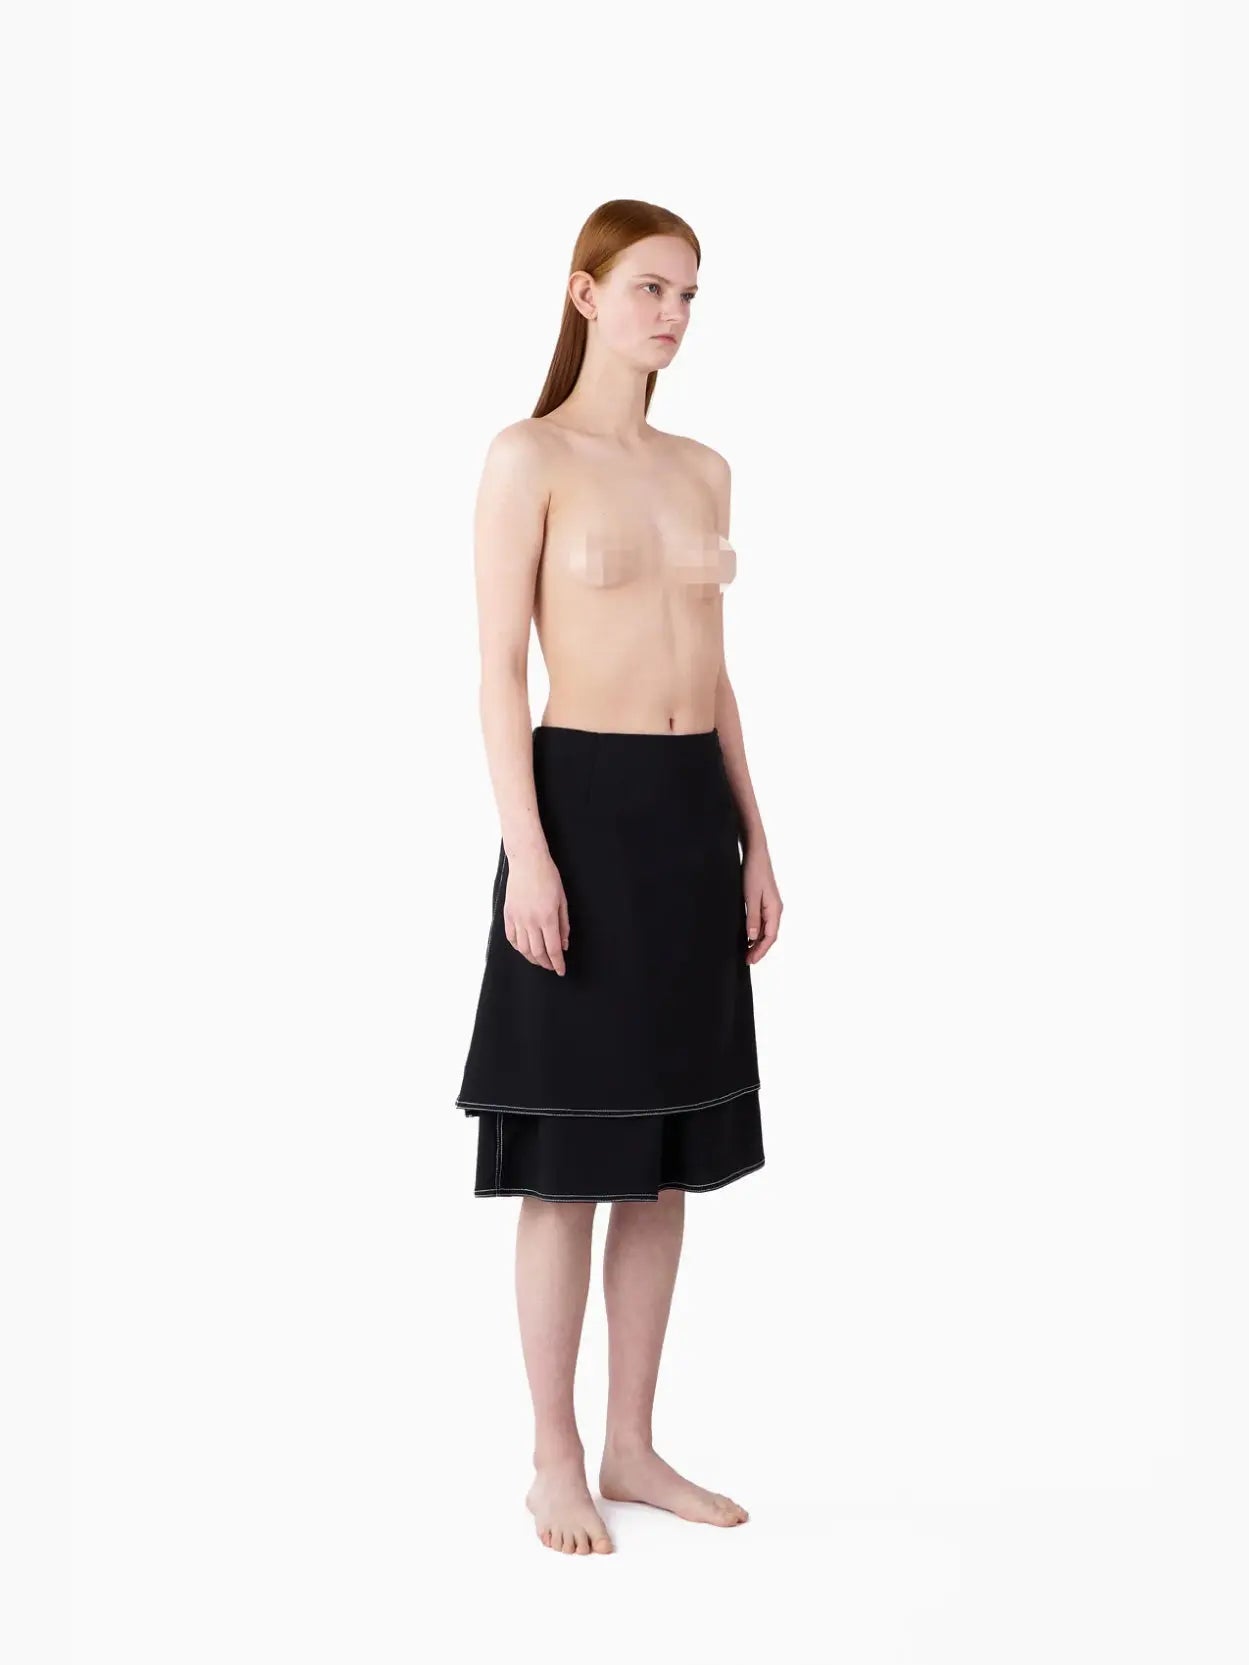 A black double-layered mini skirt with white stitching accents. The design features a layered look, with a shorter top layer and a longer underlayer, creating a stylish and modern appearance. Displayed against a white background, this chic piece is available at Bassalstore in Barcelona. The product name is Panta Skirt Black by Sunnei.